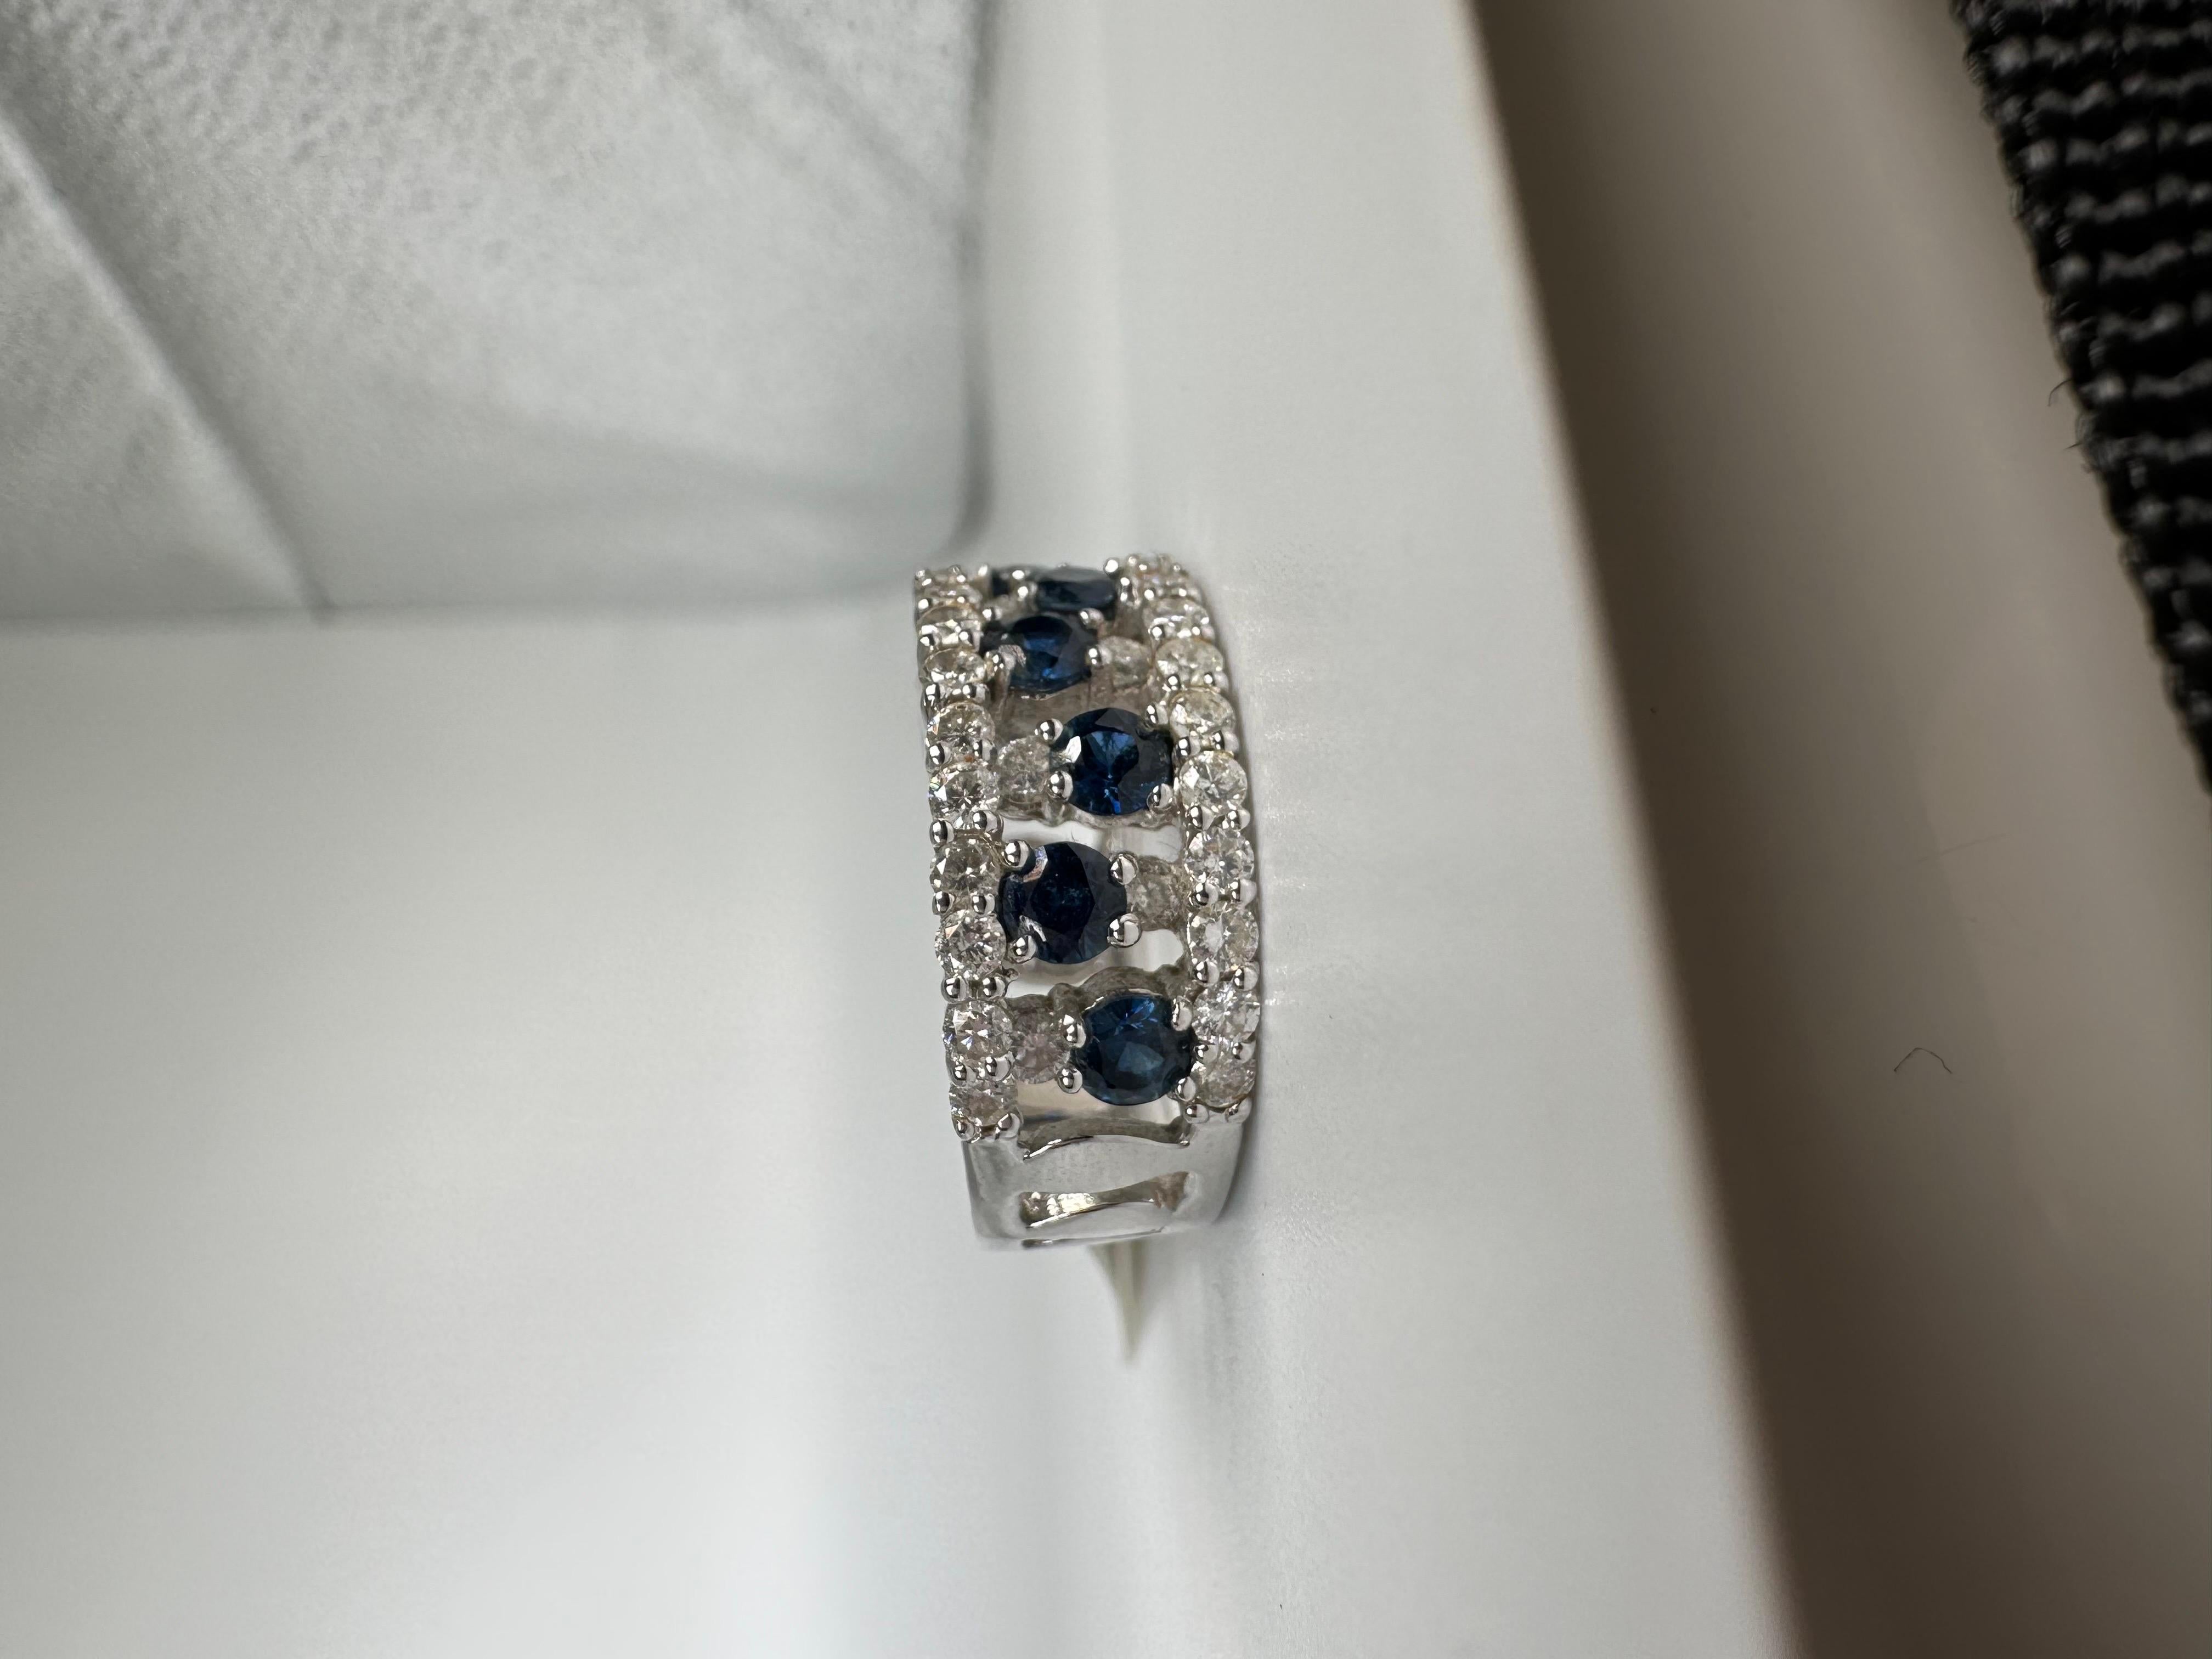 Winter garden diamond and sapphire ring in 18KT gold, sapphires weighing 1.04 carats with beautiful blue color.

METAL: 18KT gold
NATURAL DIAMOND(S)
Clarity/Color: SI/G
Carat:1.28ct
Cut:Round Brilliant
Grams:7.33
size: 6
Item20000085 

WHAT YOU GET